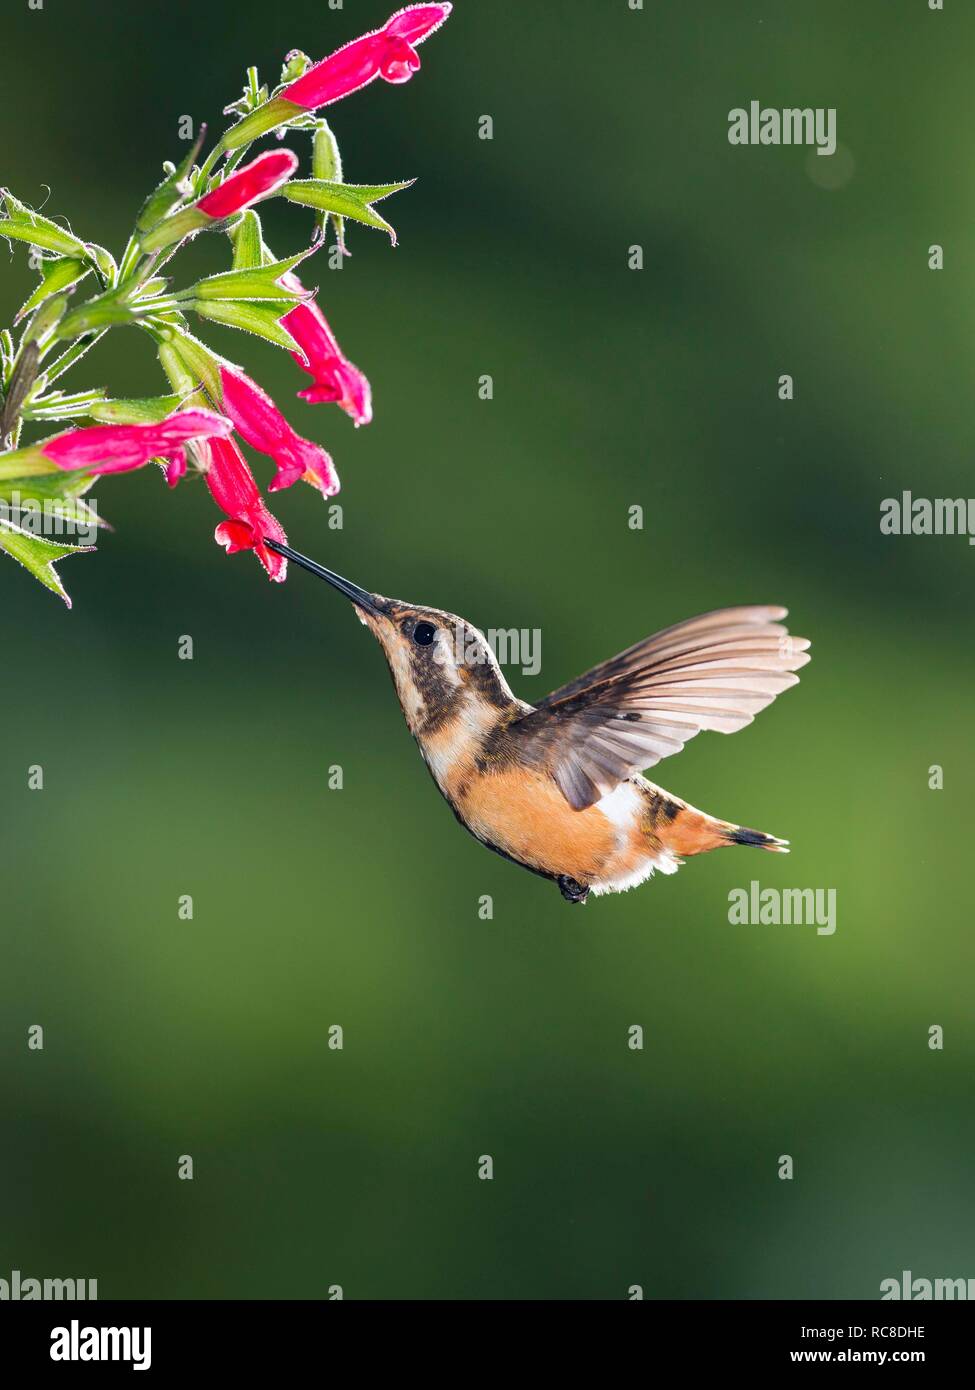 Purple-throated woodstar (Calliphlox mitchellii), female with pink flower, flying, rainforest, cloud forest Stock Photo